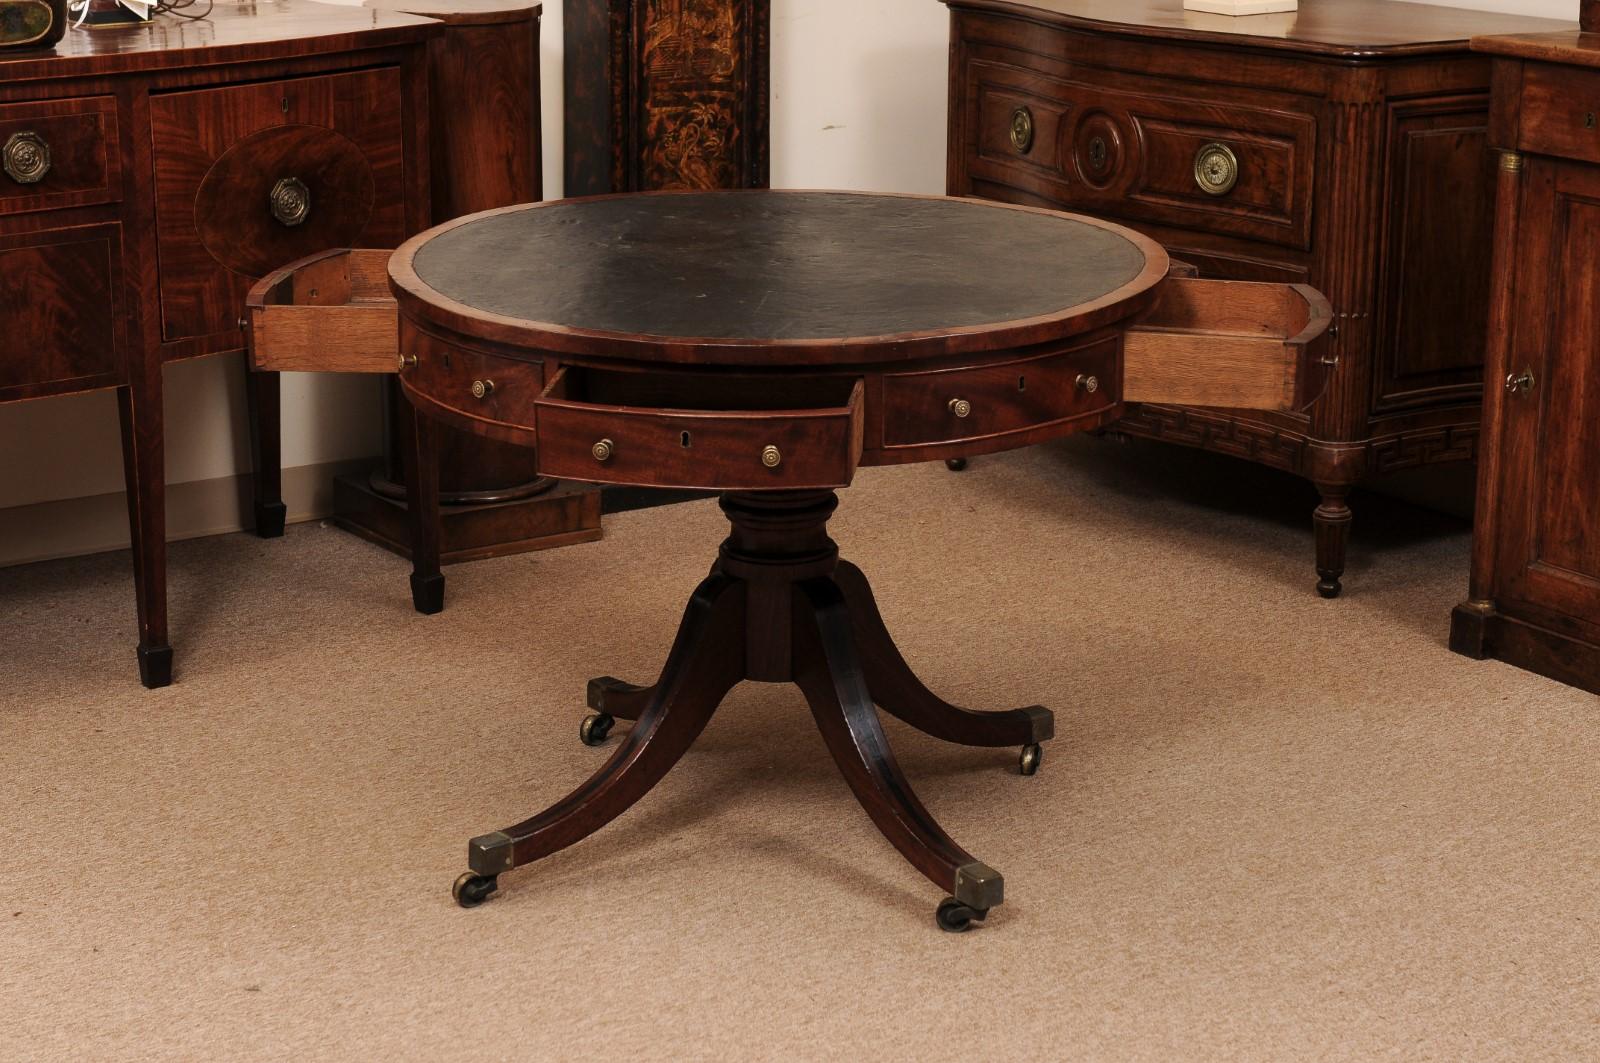 19th Century English Mahogany Drum Table with Black Leather Top For Sale 3